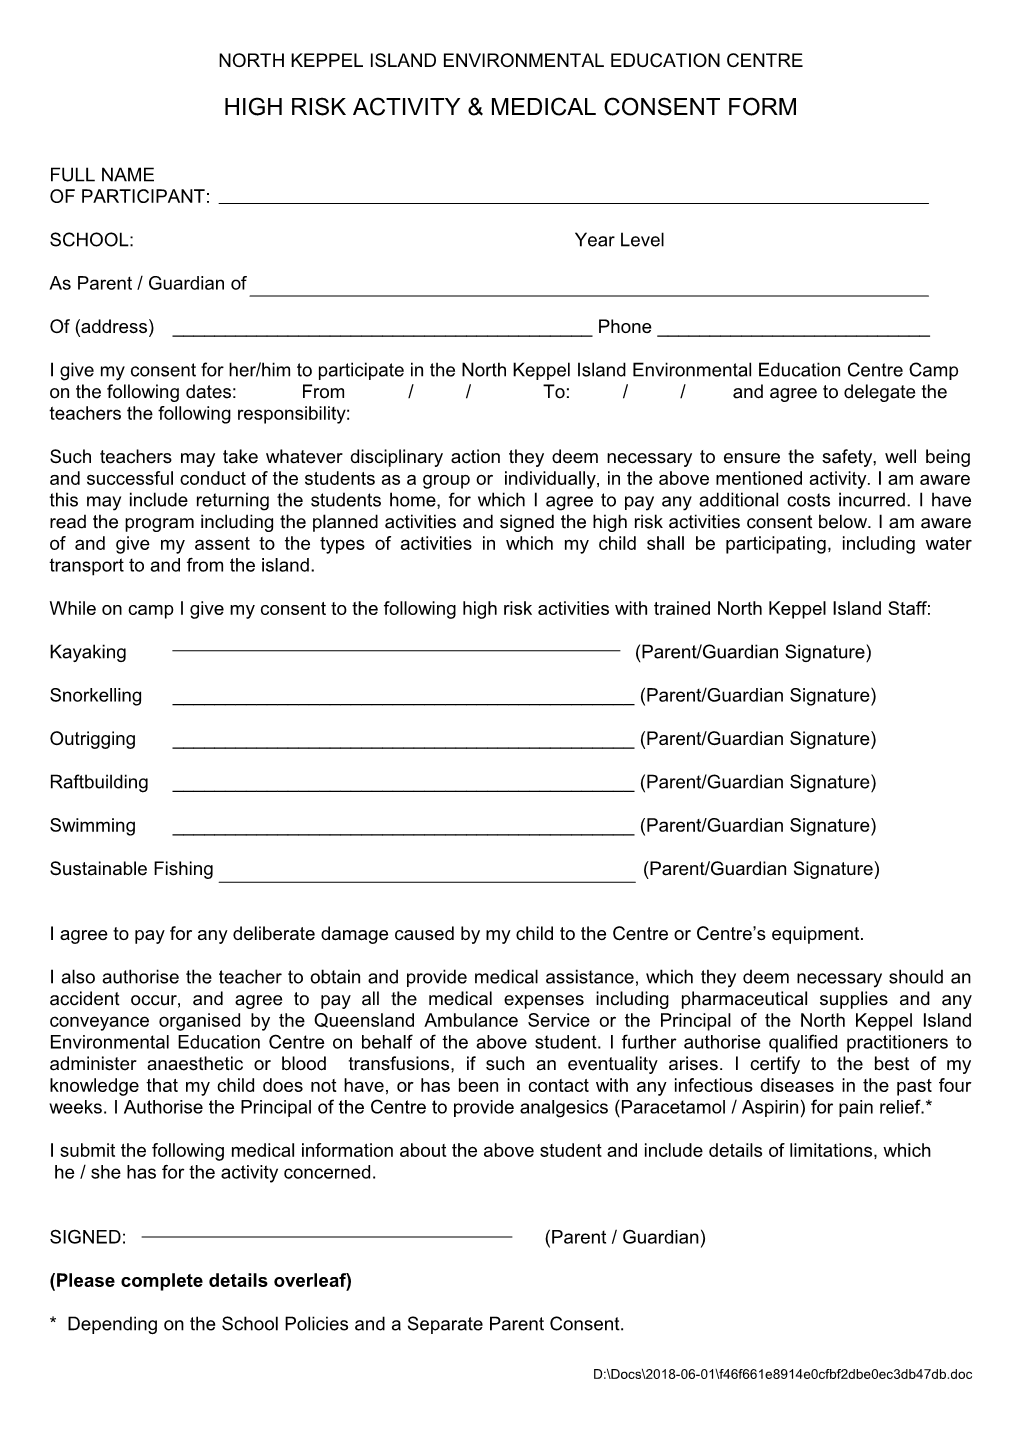 High Risk Activity and Medical Consent Form